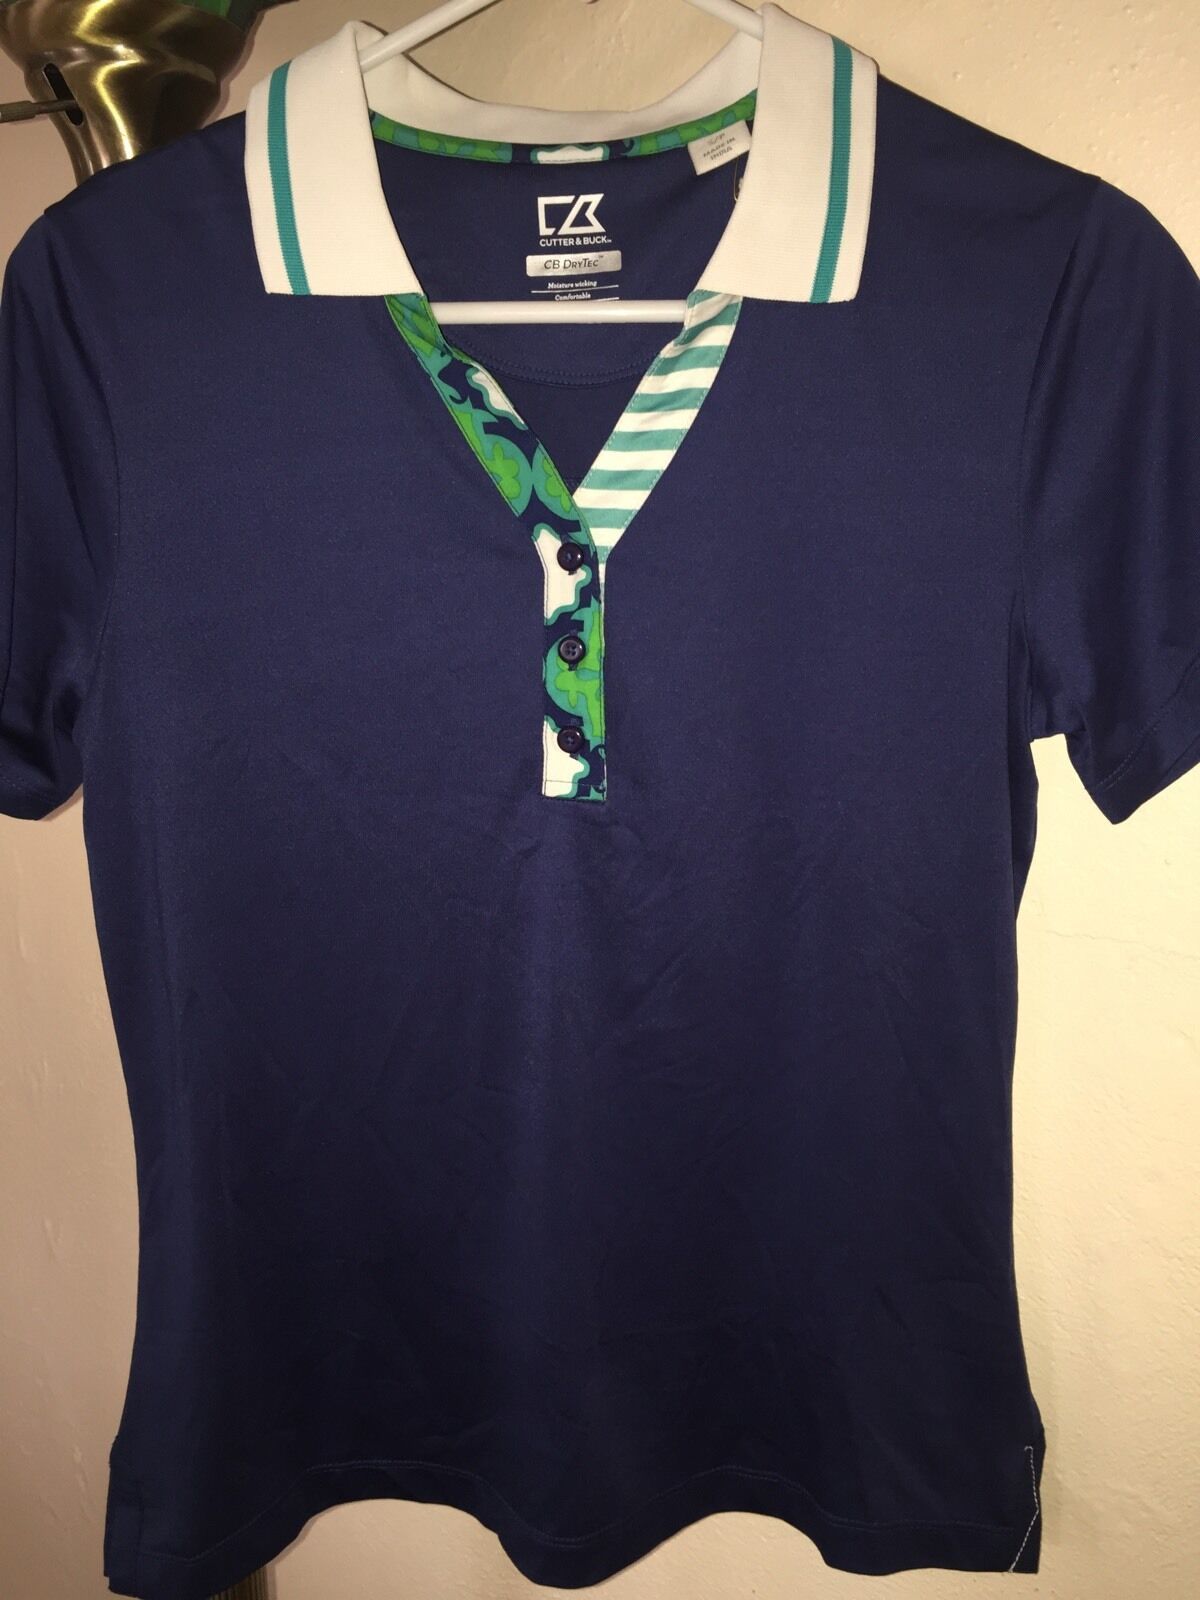 Primary image for NWT PRETTY CUTTER & BUCK DRYTEC NIKKI S/S GOLF POLO SZ SMALL